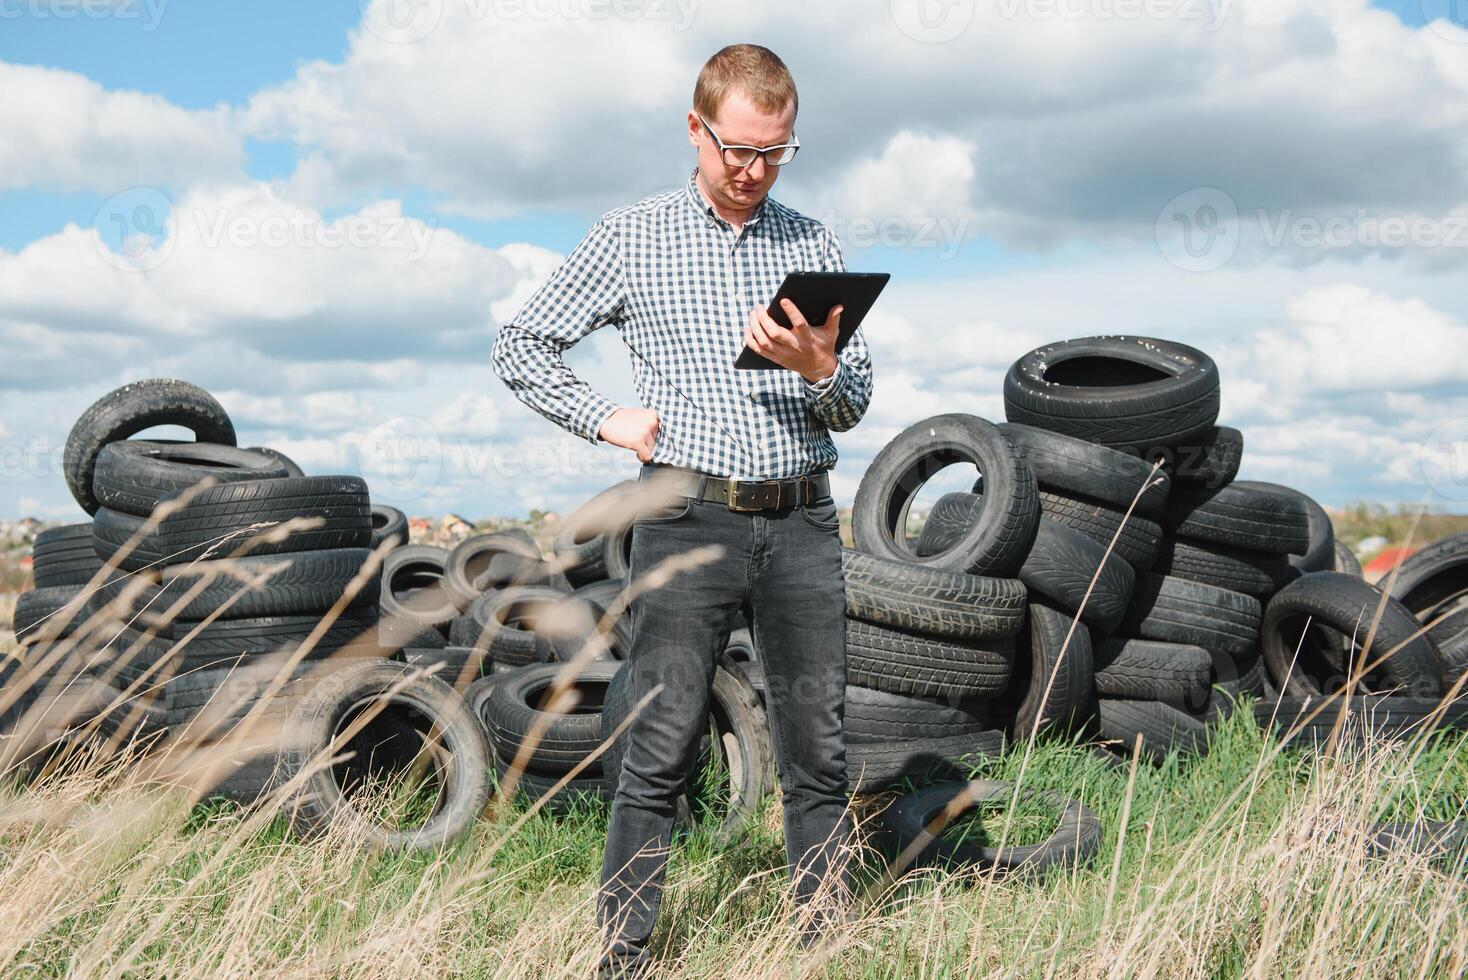 eco-activist at the landfill of used car tires calculates environmental damage. Nature conservation concept photo